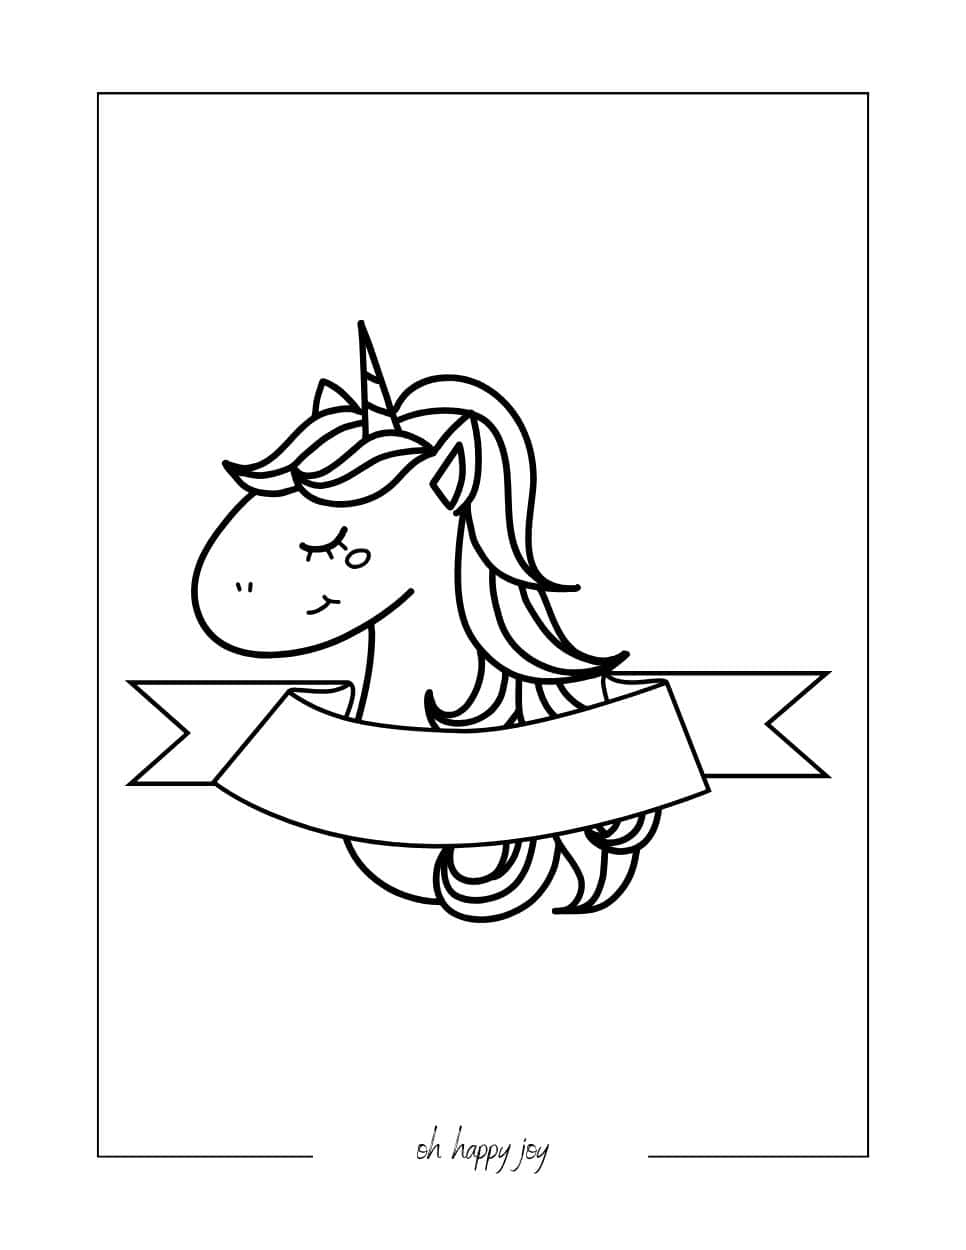 Cute Unicorn Banner Coloring Page